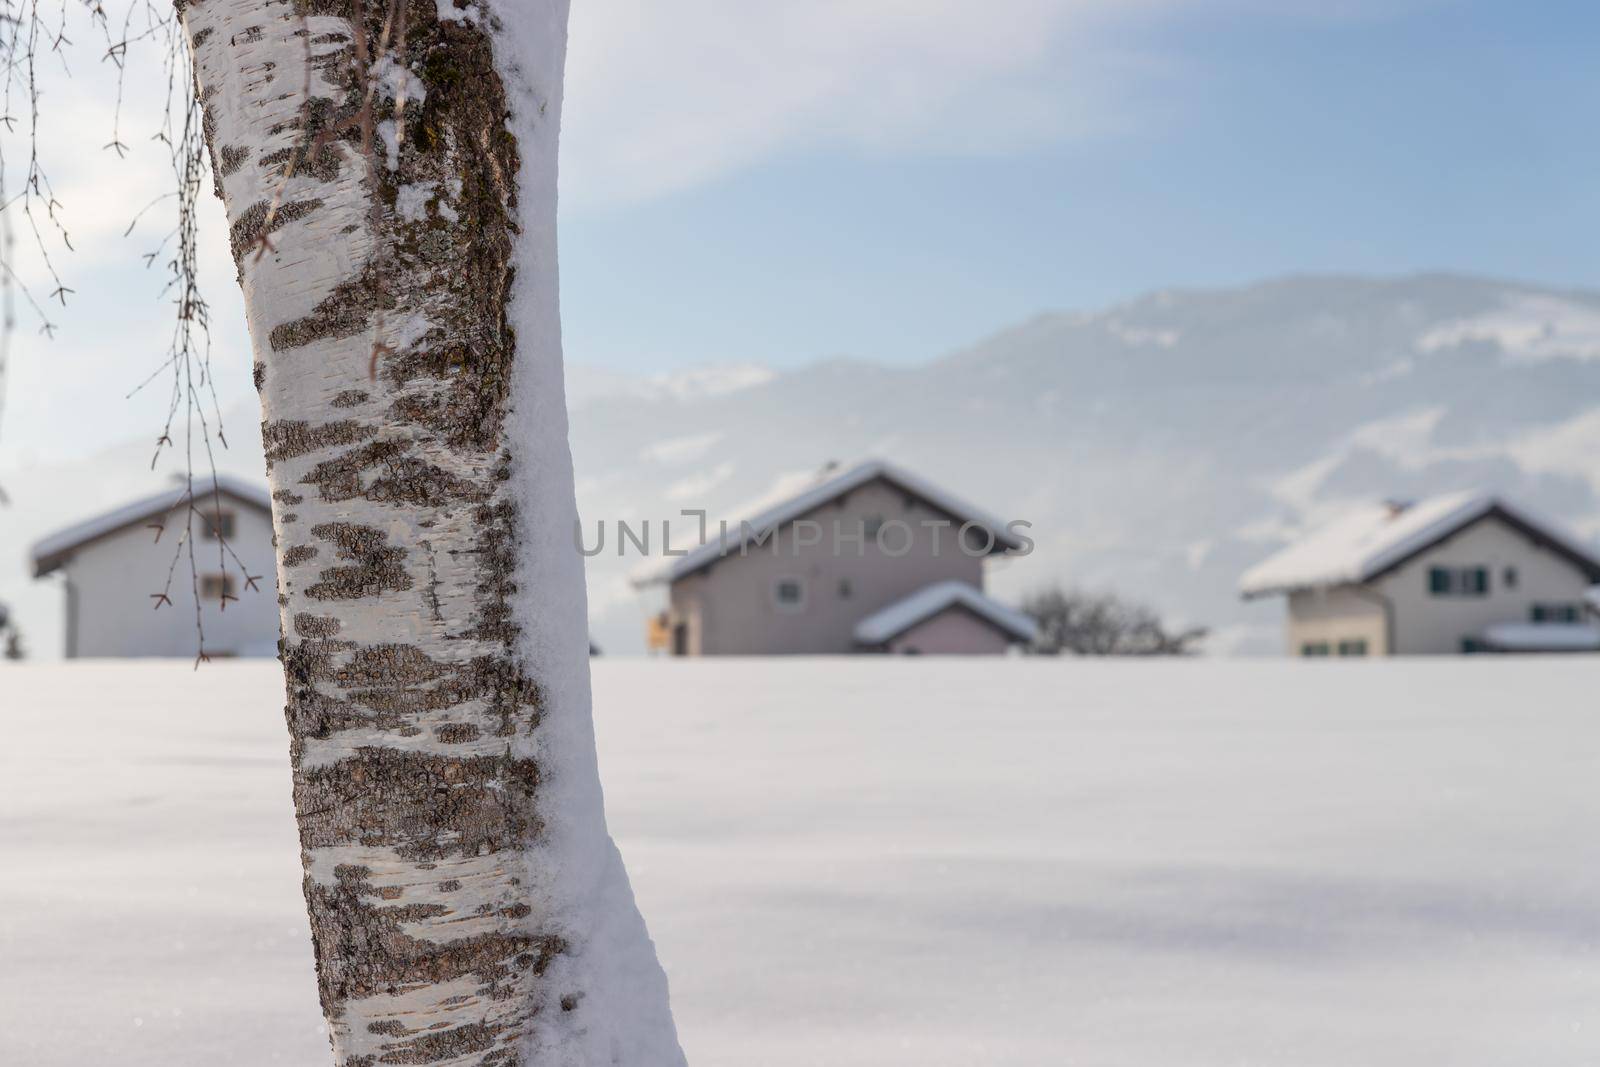 Winter landscape: Snowy trunk of a birch on a field, wintertime, blurry houses in the background